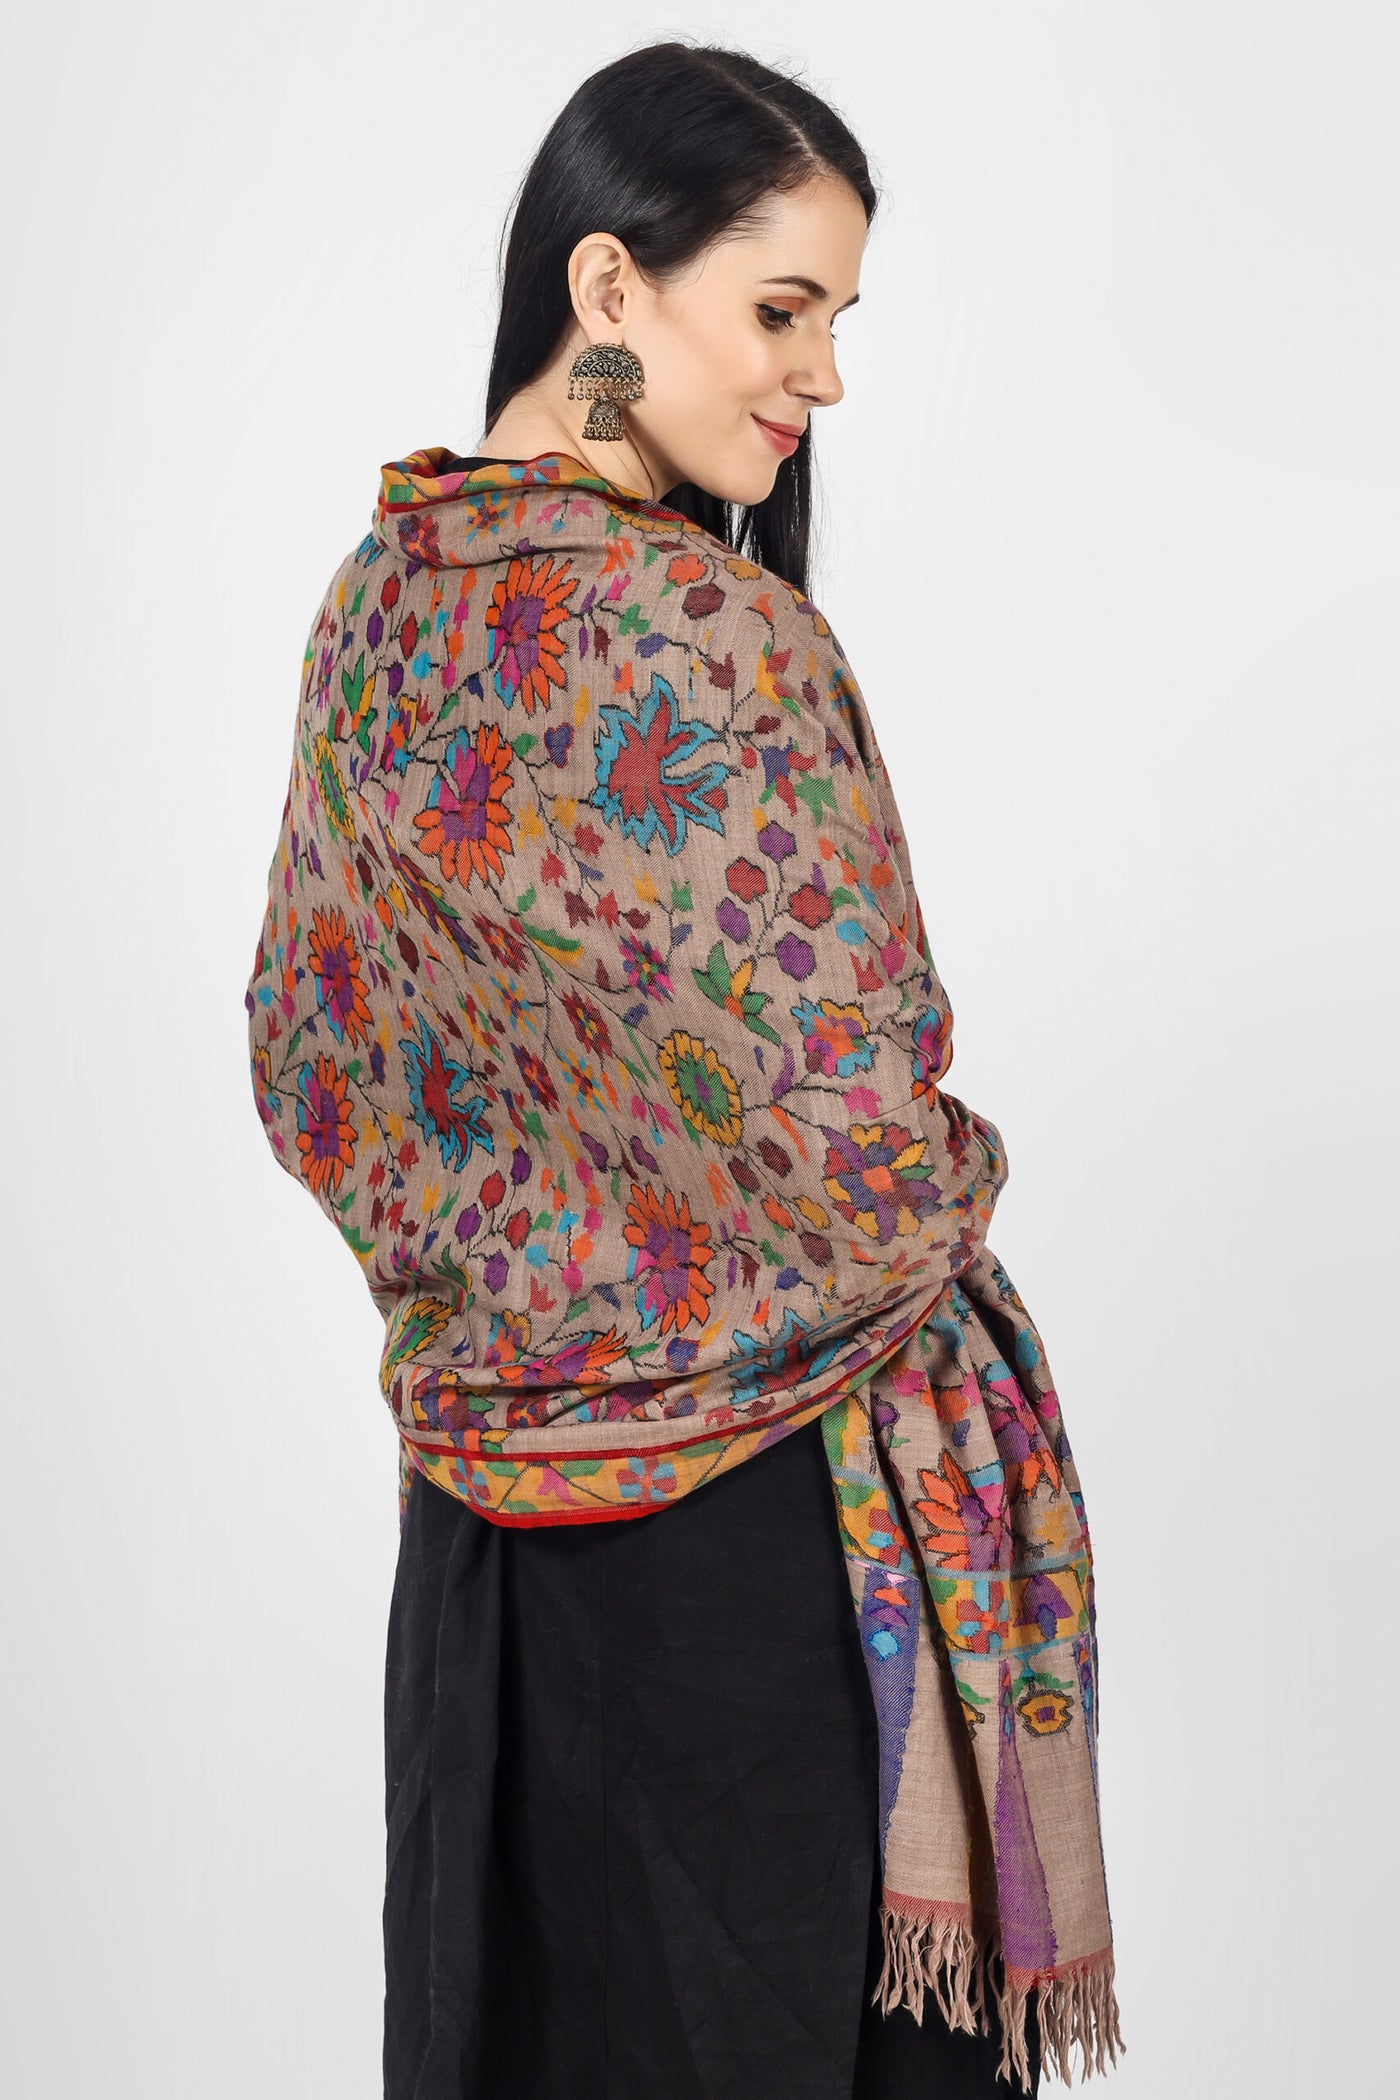  "KANI SHAWL - The Ravishing Shade of Natural (Khudrang) Woven with Dancing Florals and Nature's Colors in Splendid Kani Weave liked by these countries - USA, UK, GERMANY, UAE, INDIA, FRANCE, CANADA, AUSTRALIA, JAPAN, CHINA."